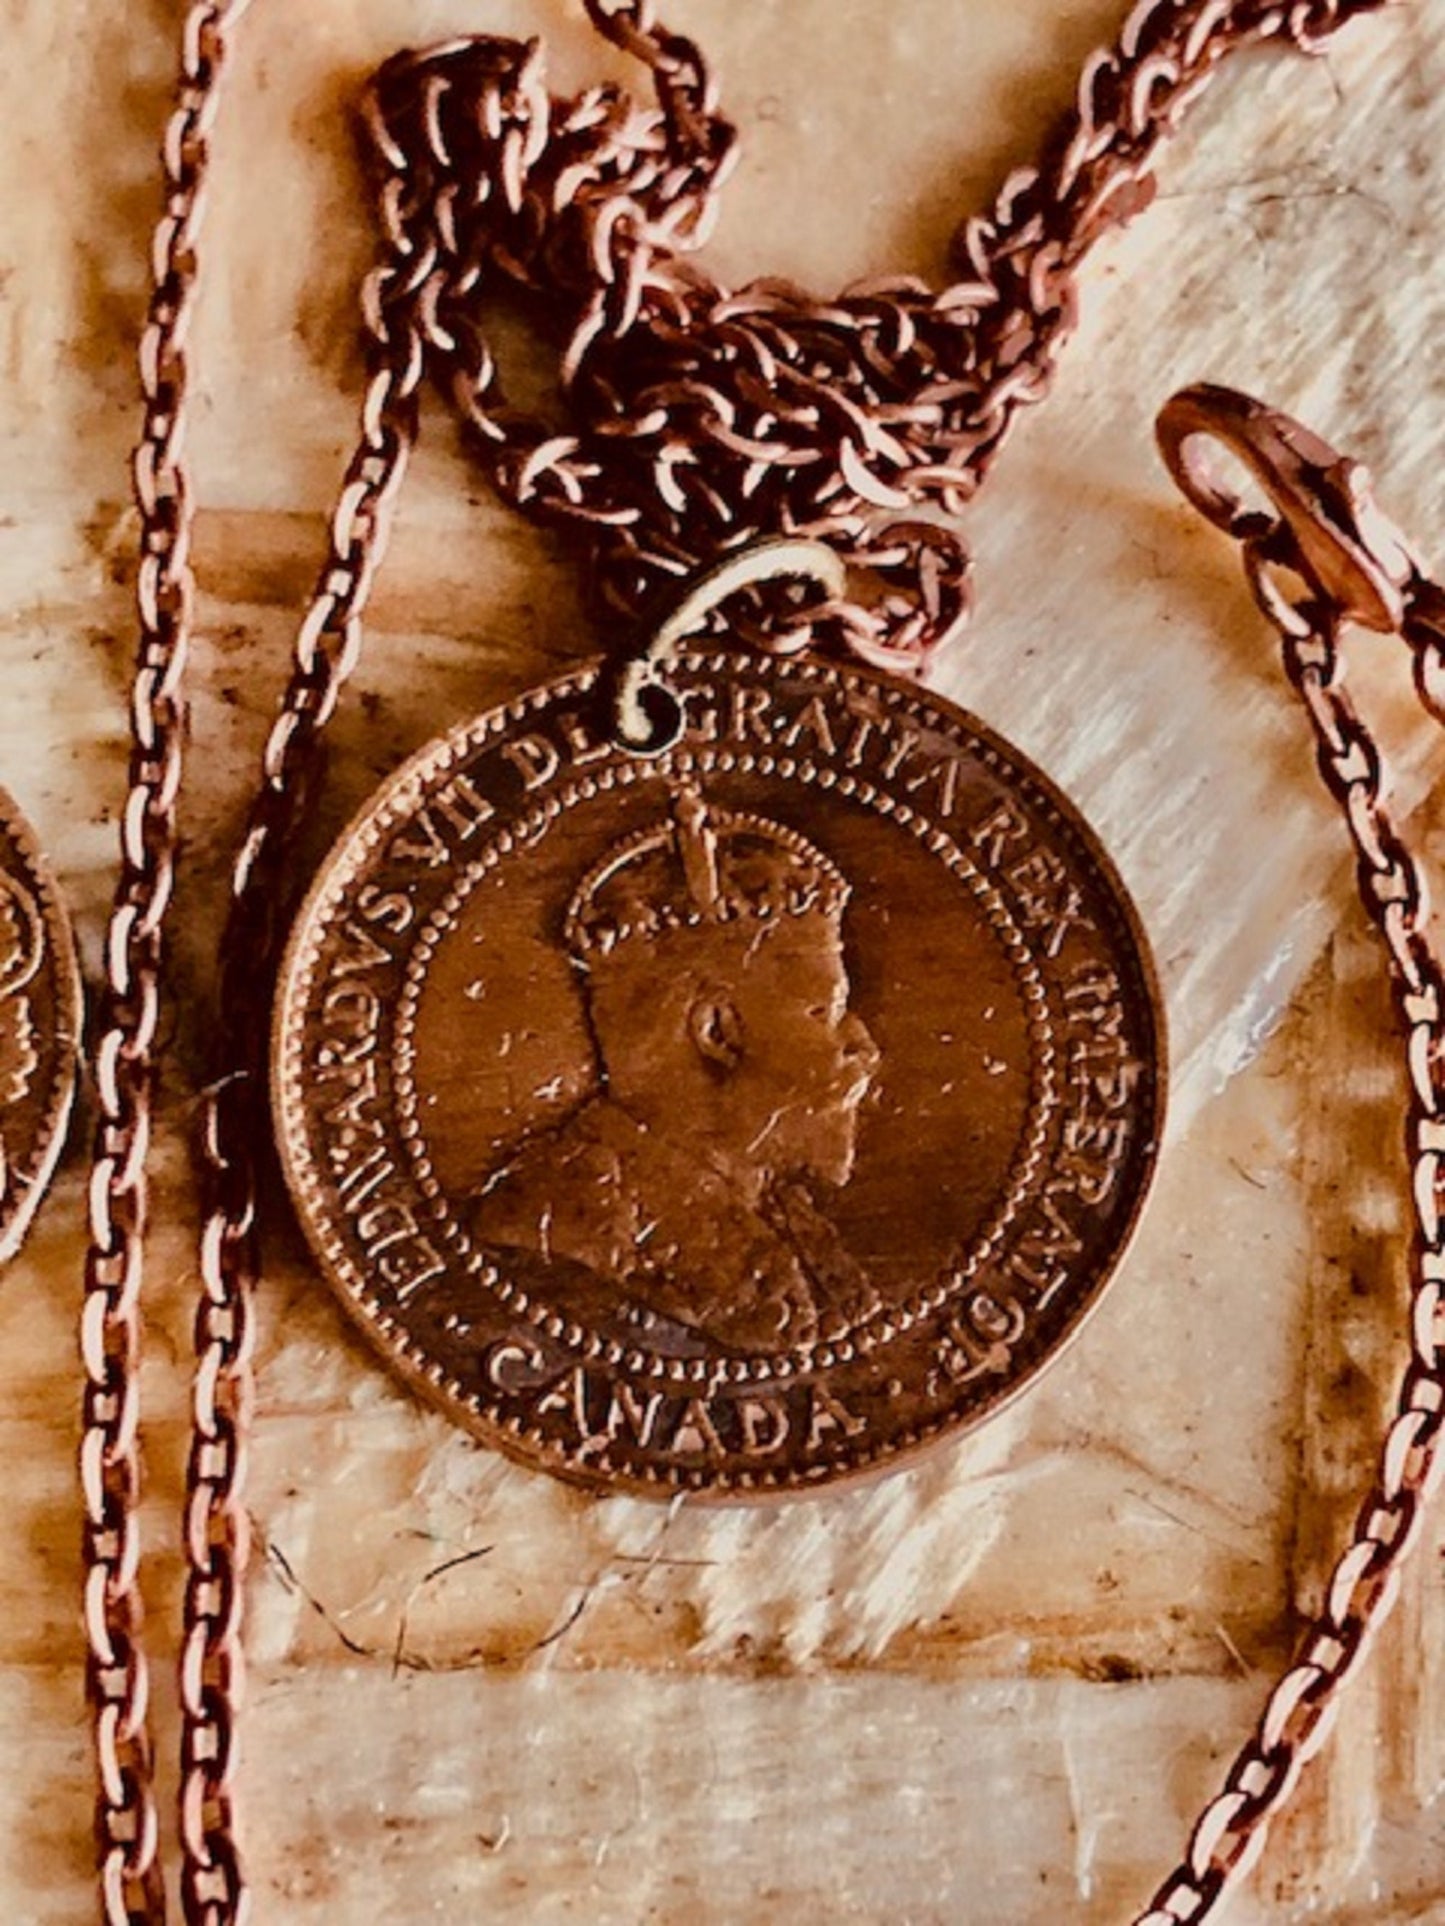 Canada Penny Coin Pendant One Canadian Cent Personal Necklace Vintage Handmade Jewelry Gift Friend Charm For Him Her World Coin Collector